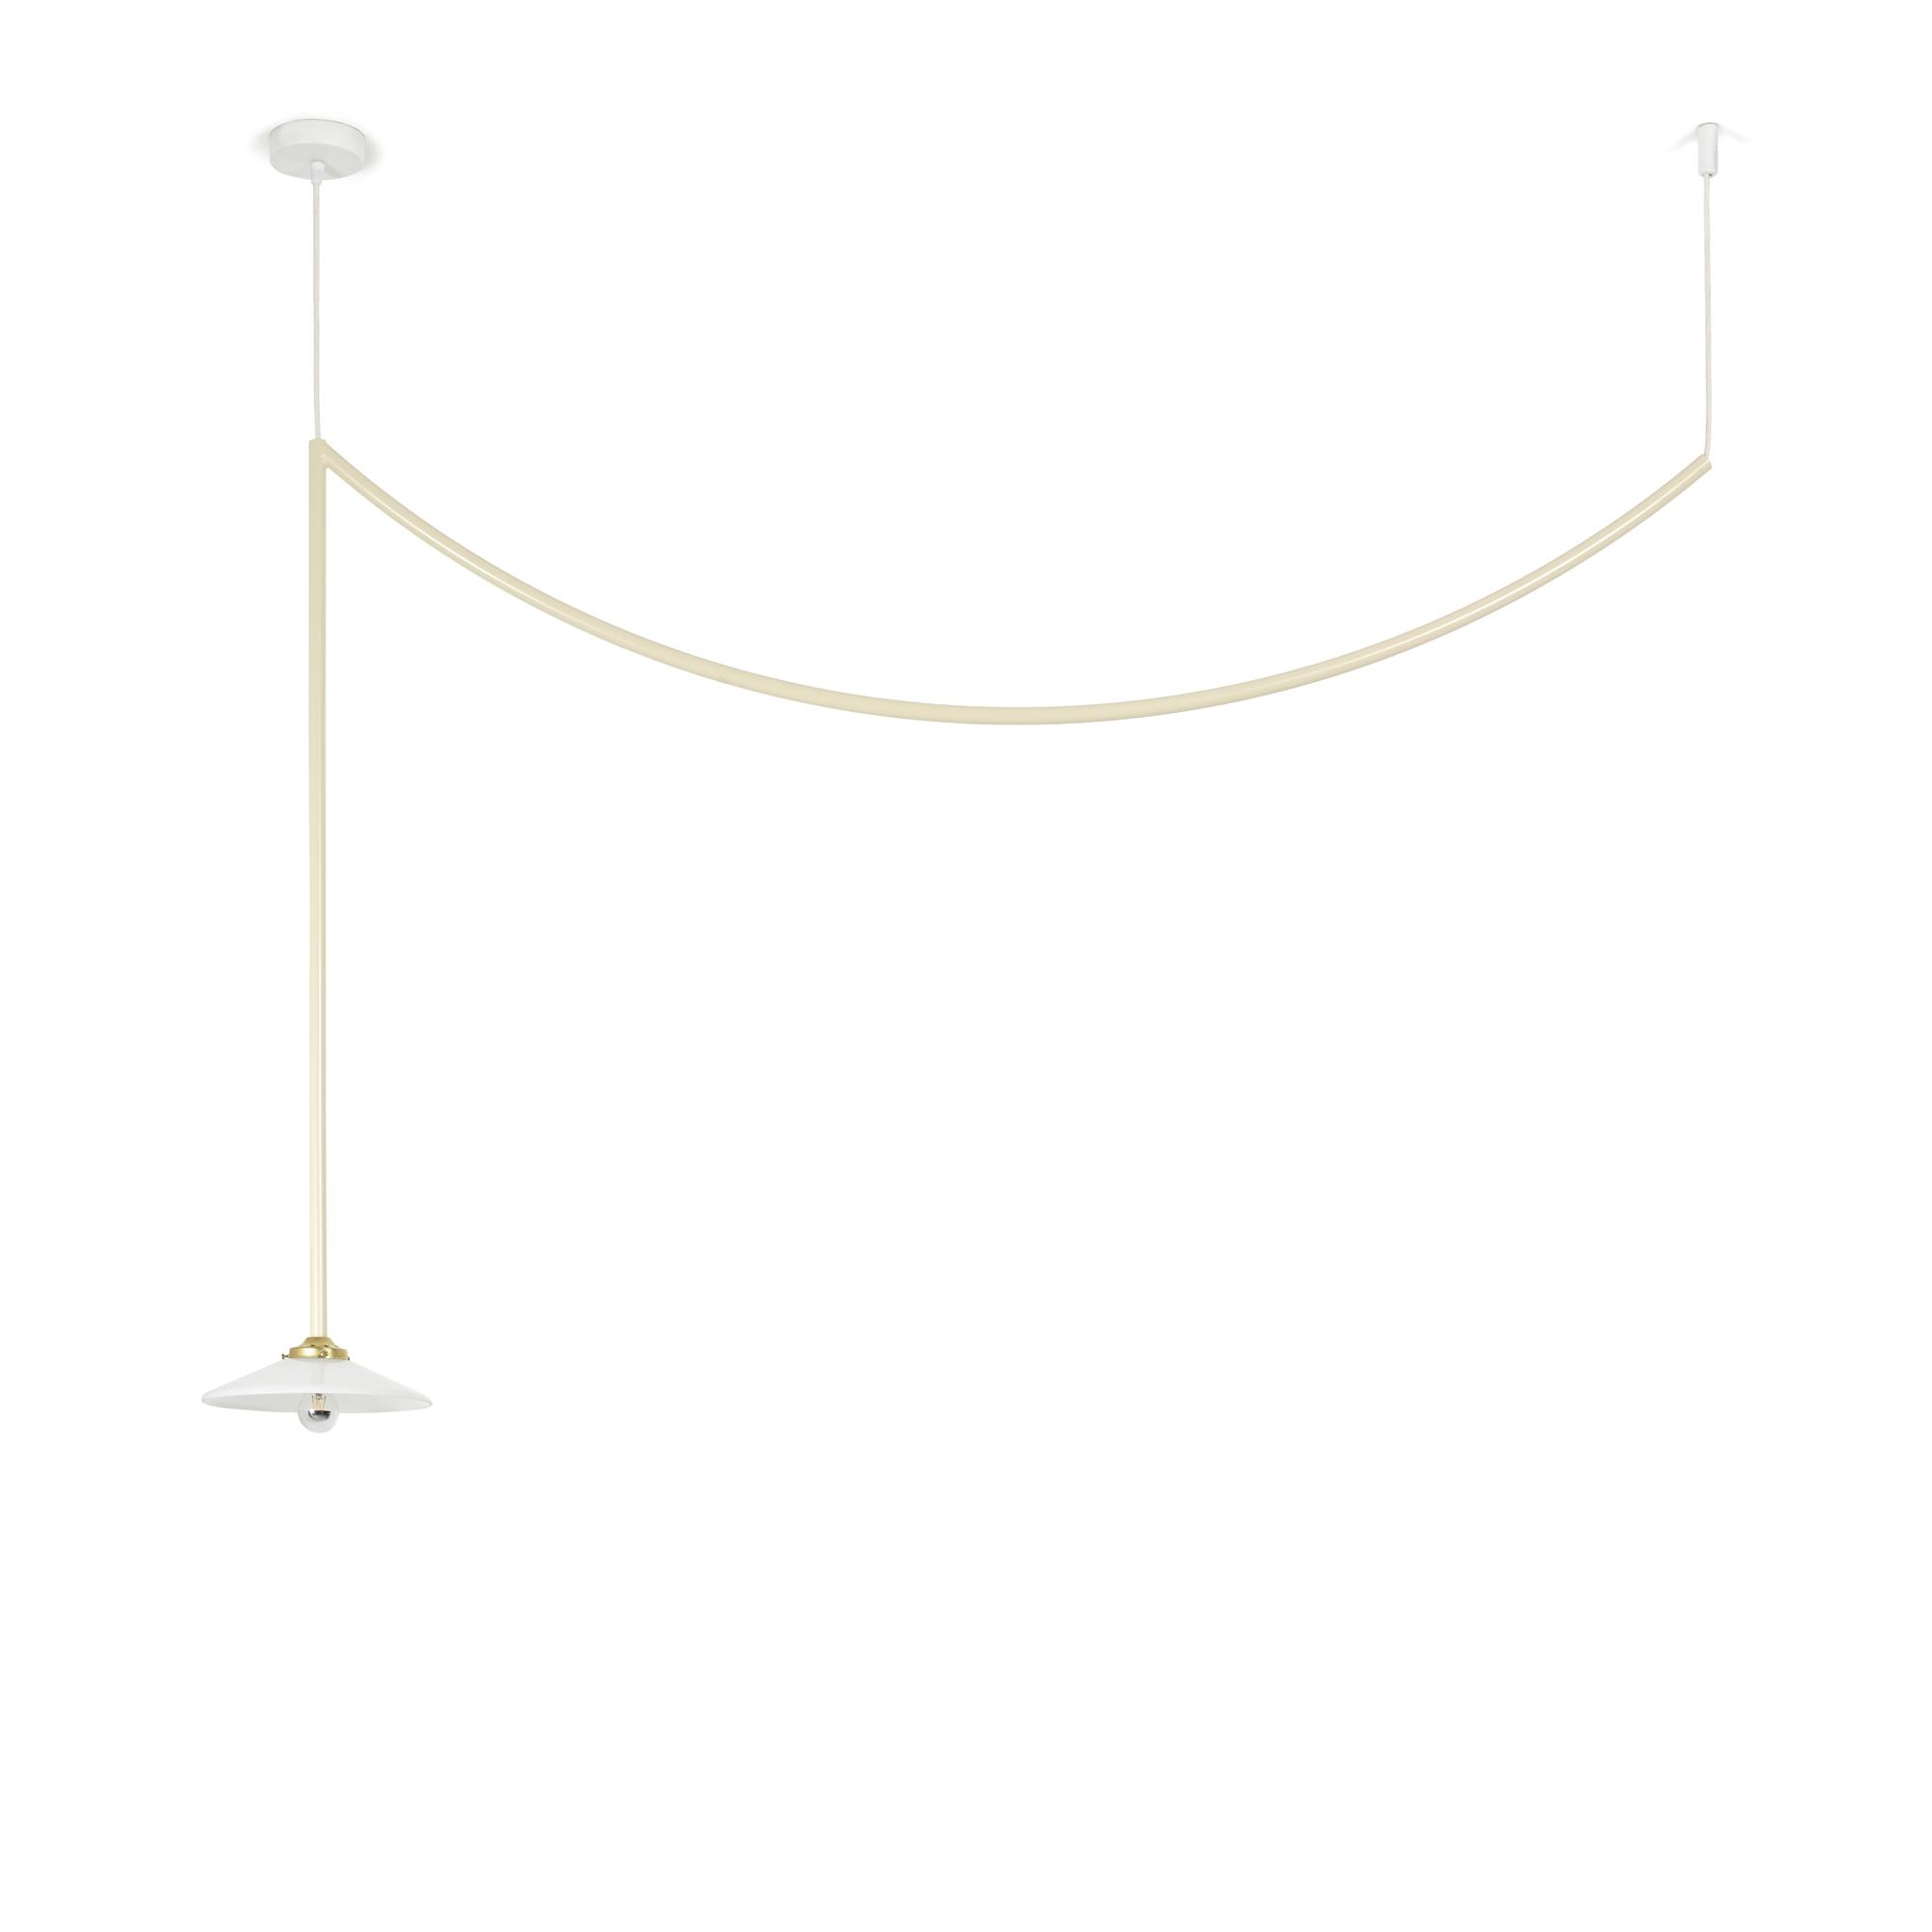 Valerie Objects Ceiling Lamp N°4 Lampa Sufitowa Mosi??ny